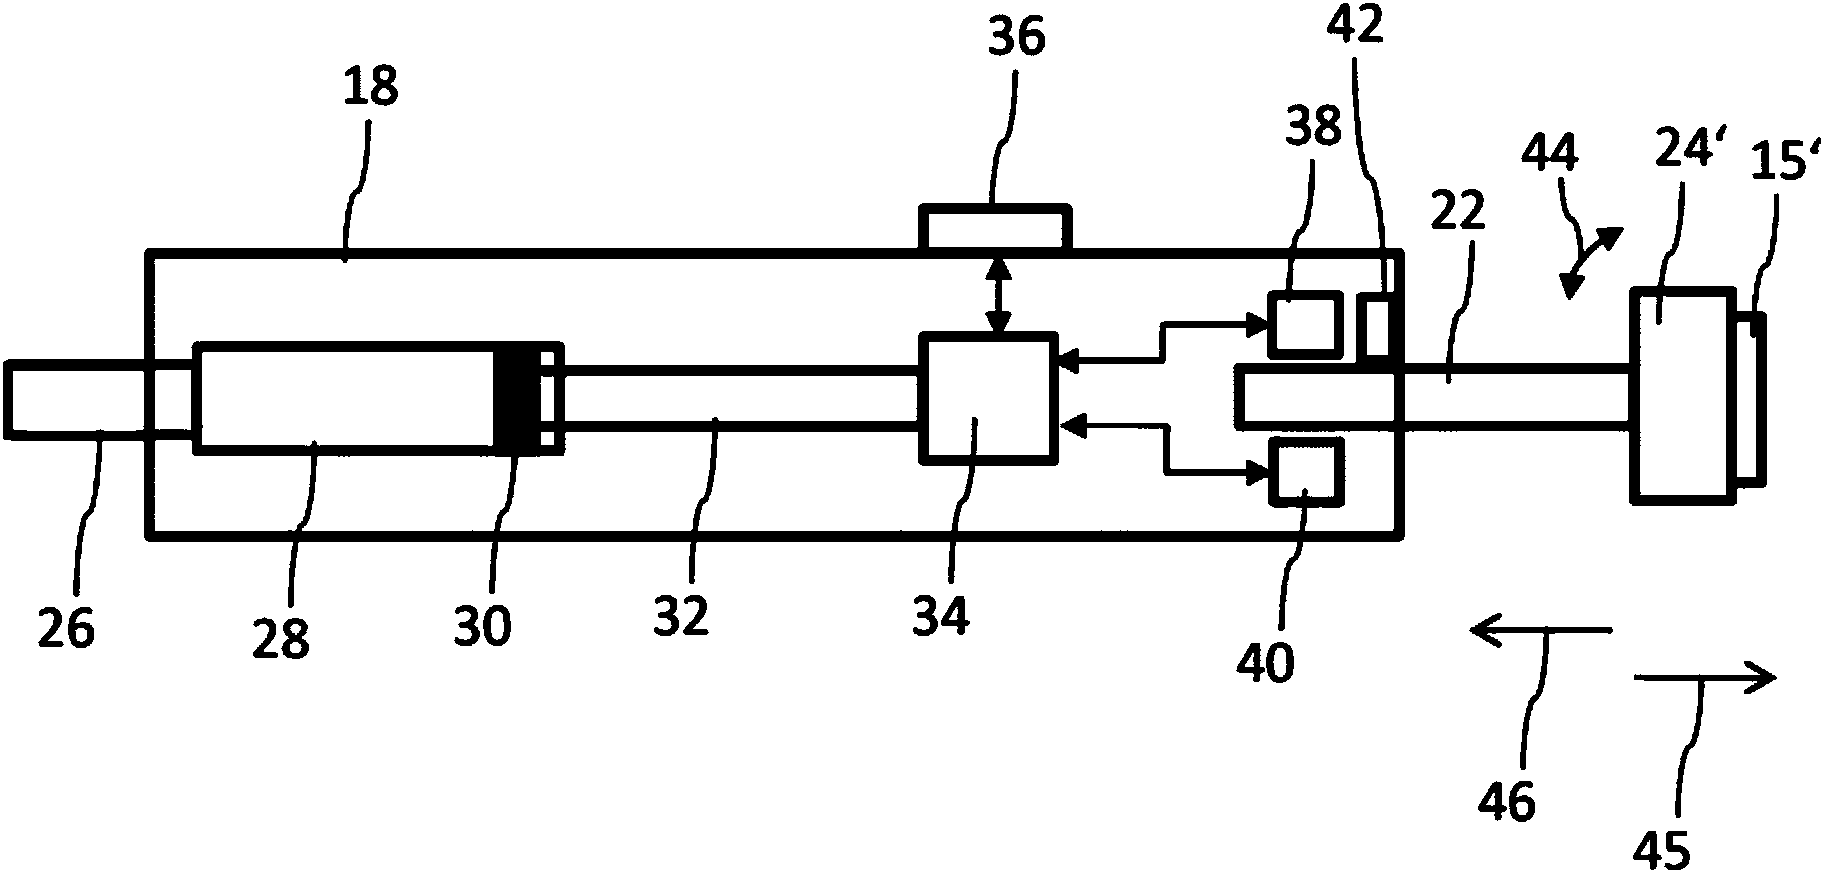 Drug delivery device with electro-mechanic drive mechanism